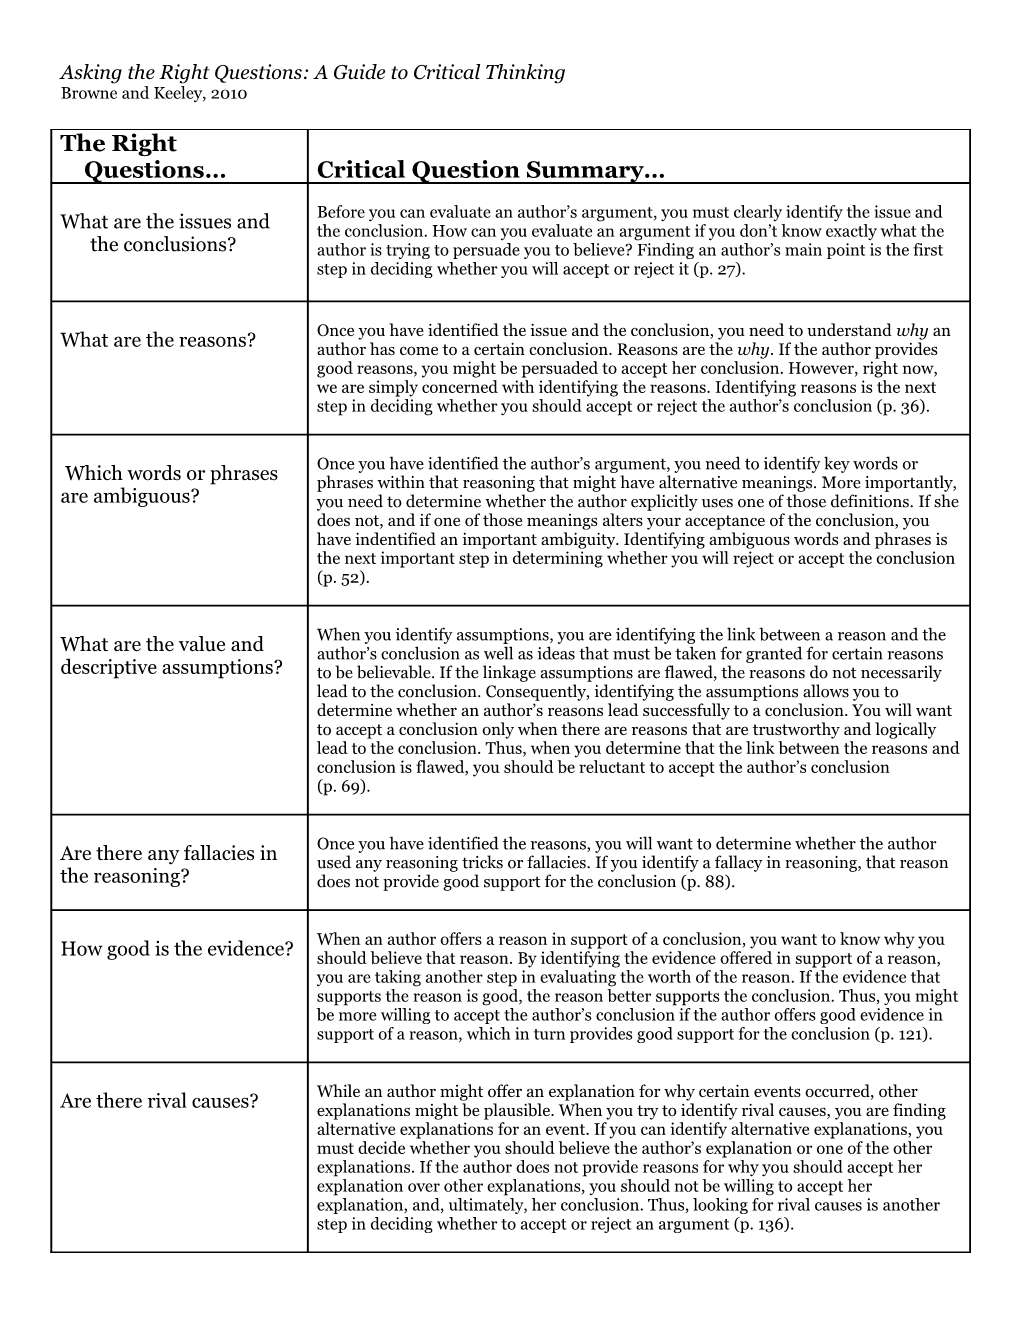 Asking the Right Questions: a Guide to Critical Thinking